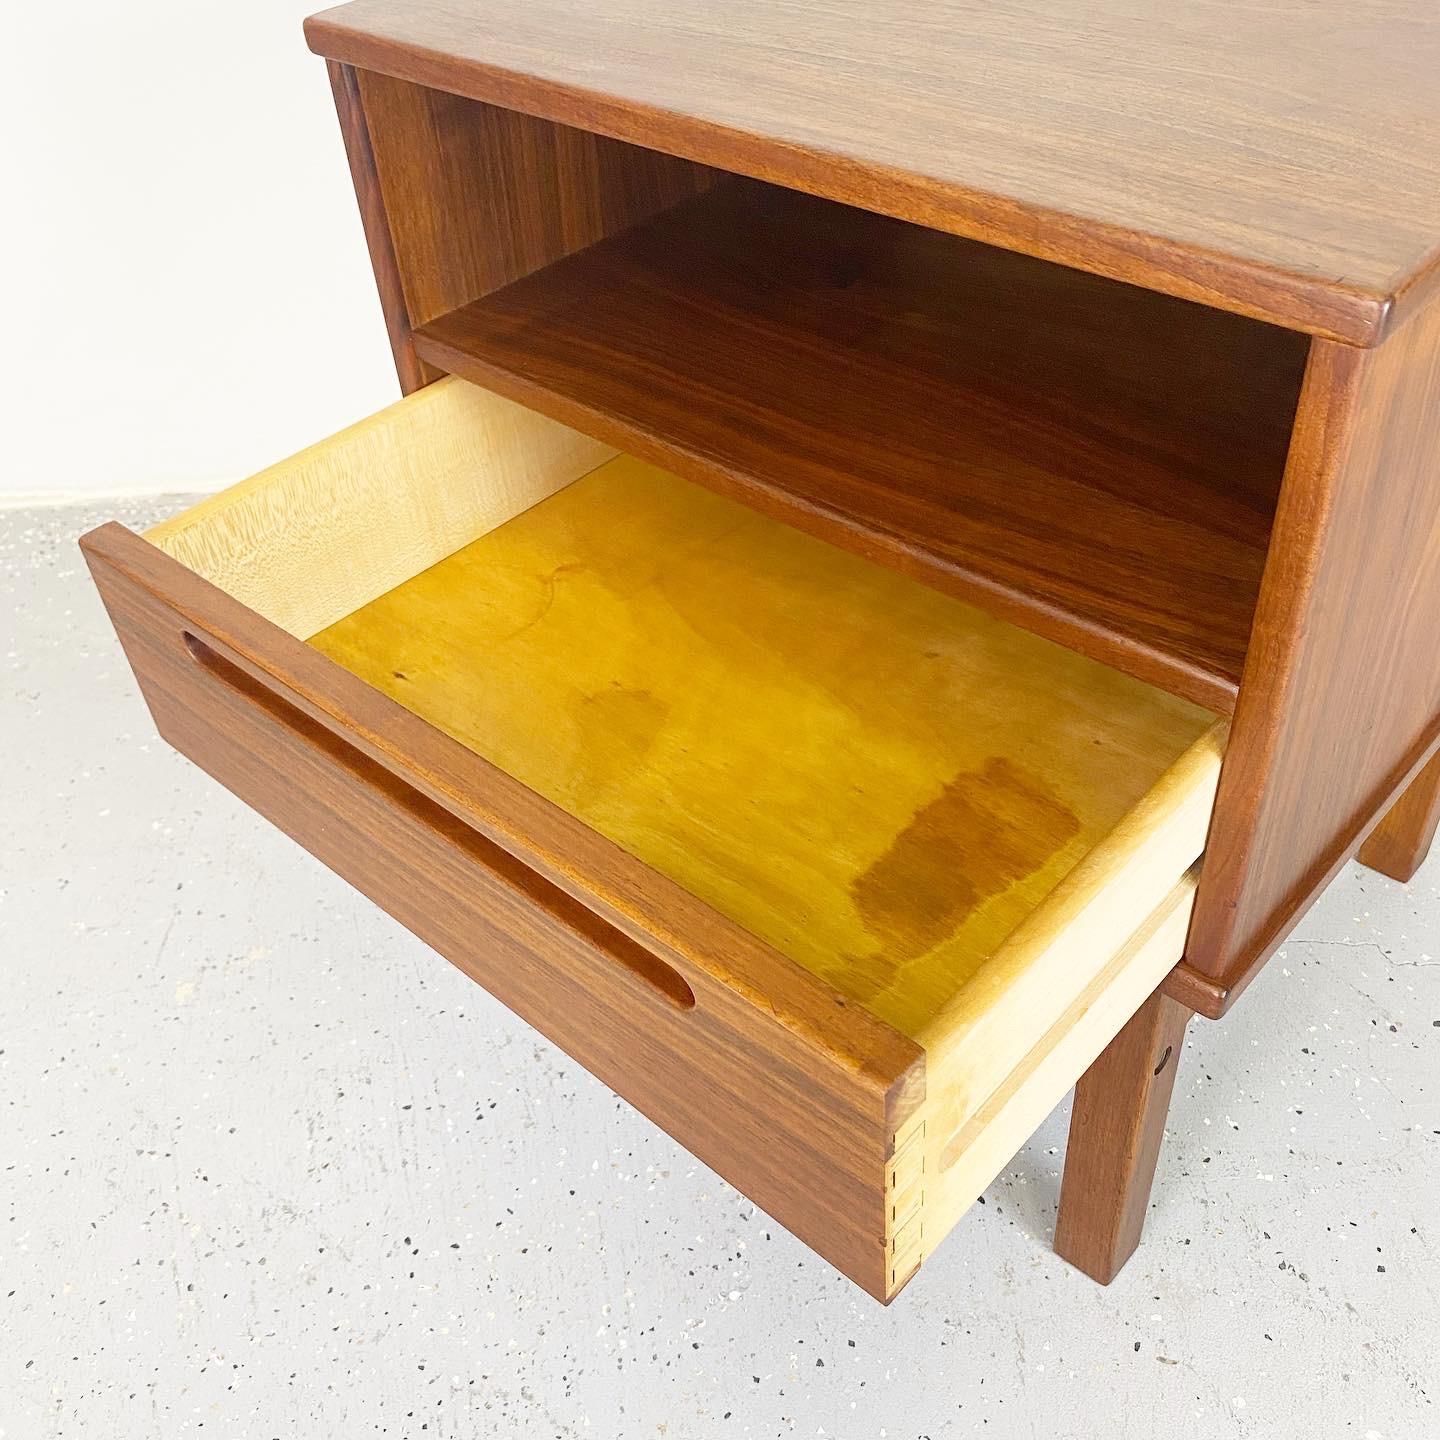 Simple and beautiful single drawer night stand in oiled teak by Nils Jonsson.